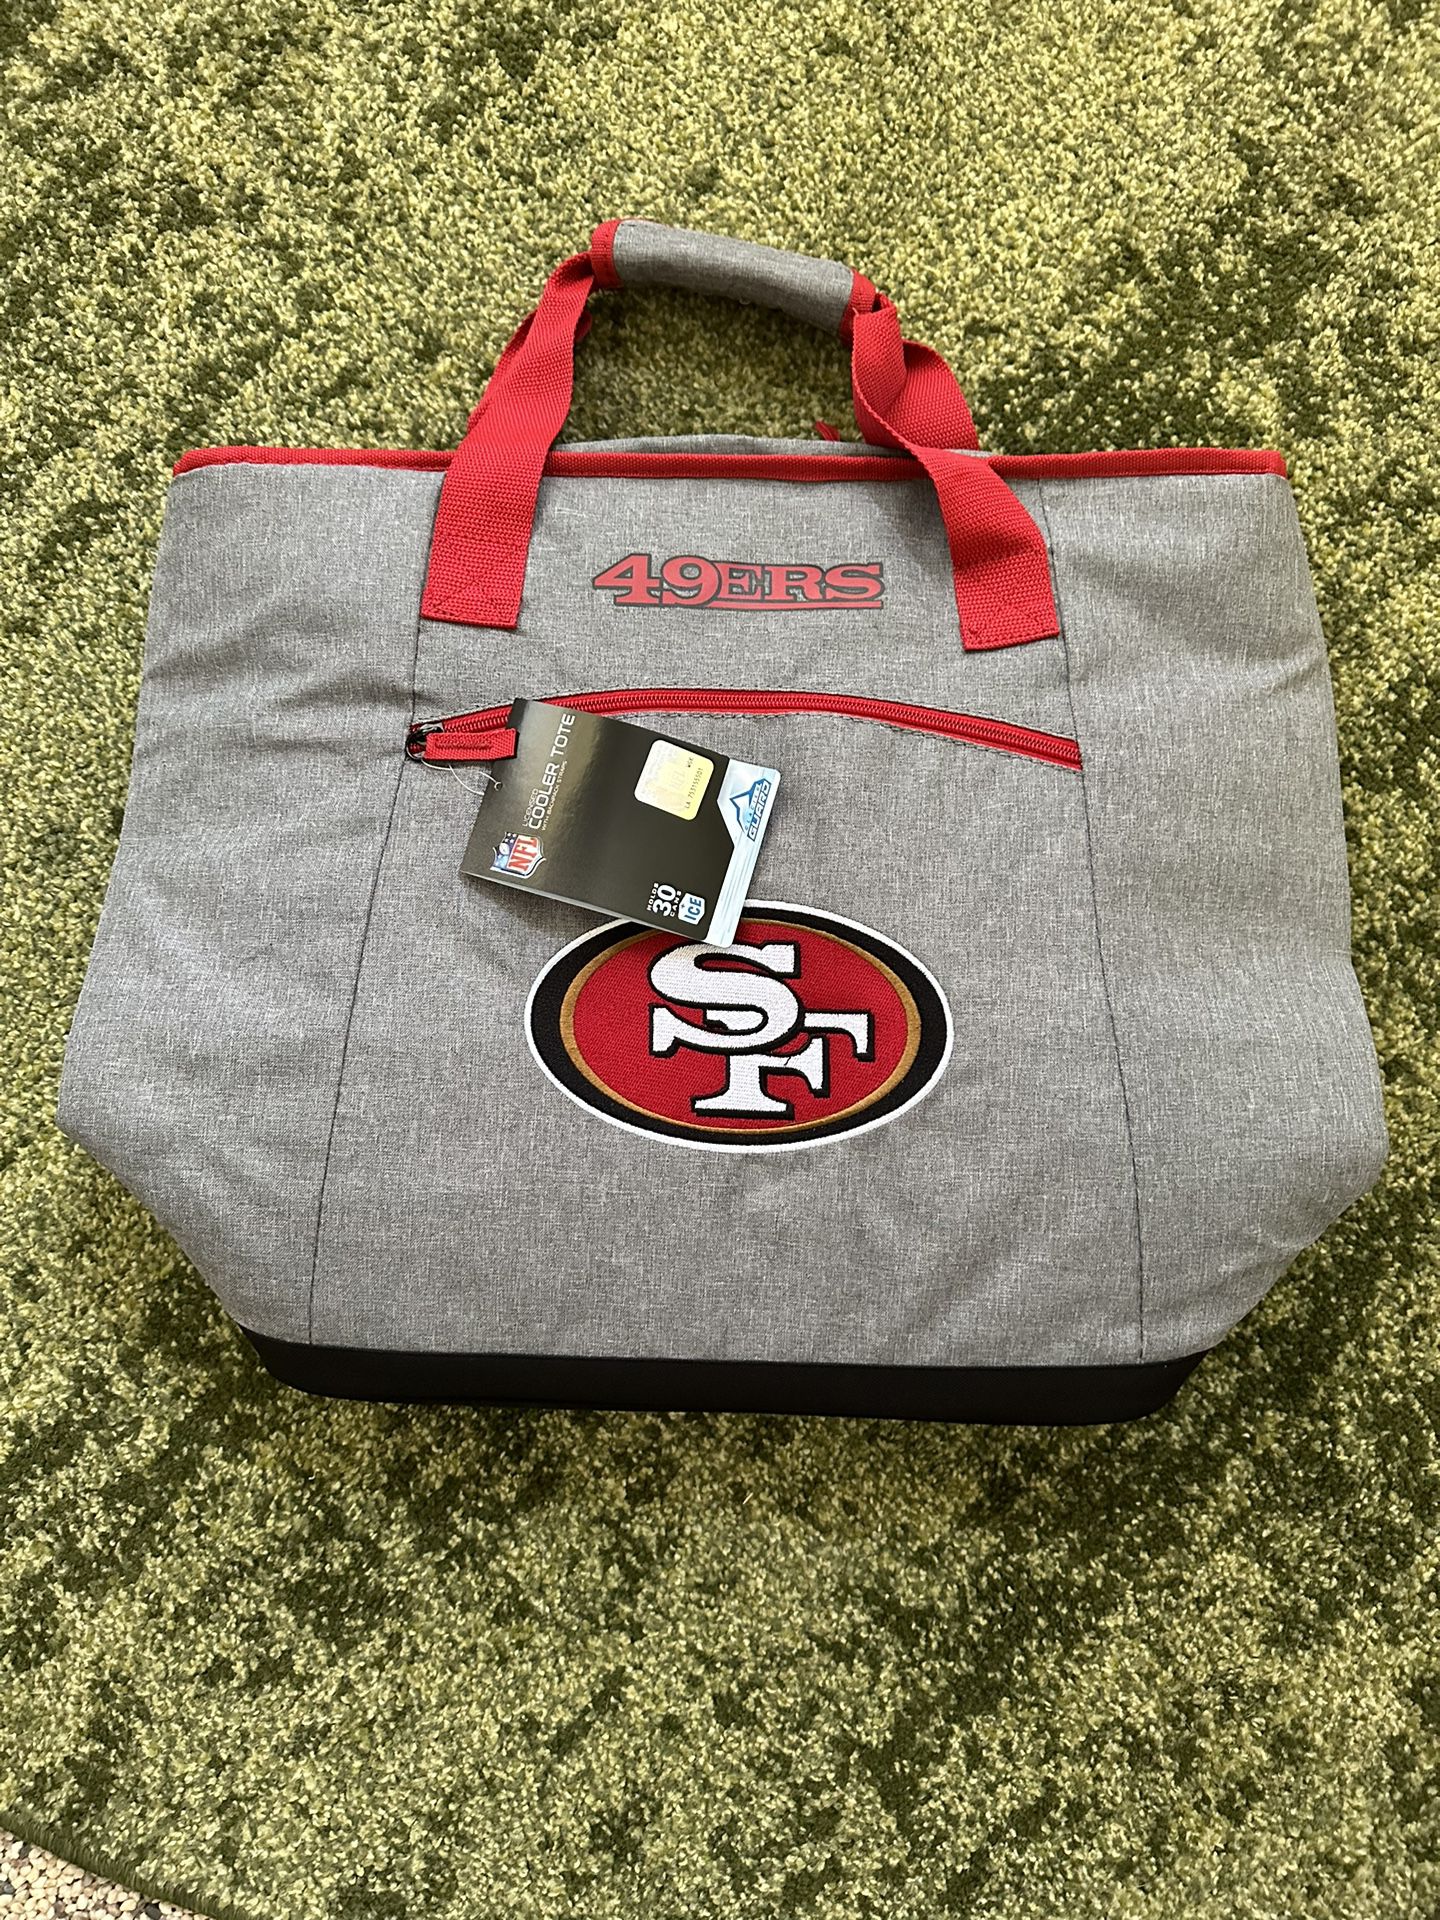 49ers Tote Bag Cooler Holds Up To 30 Cans Tailgate 